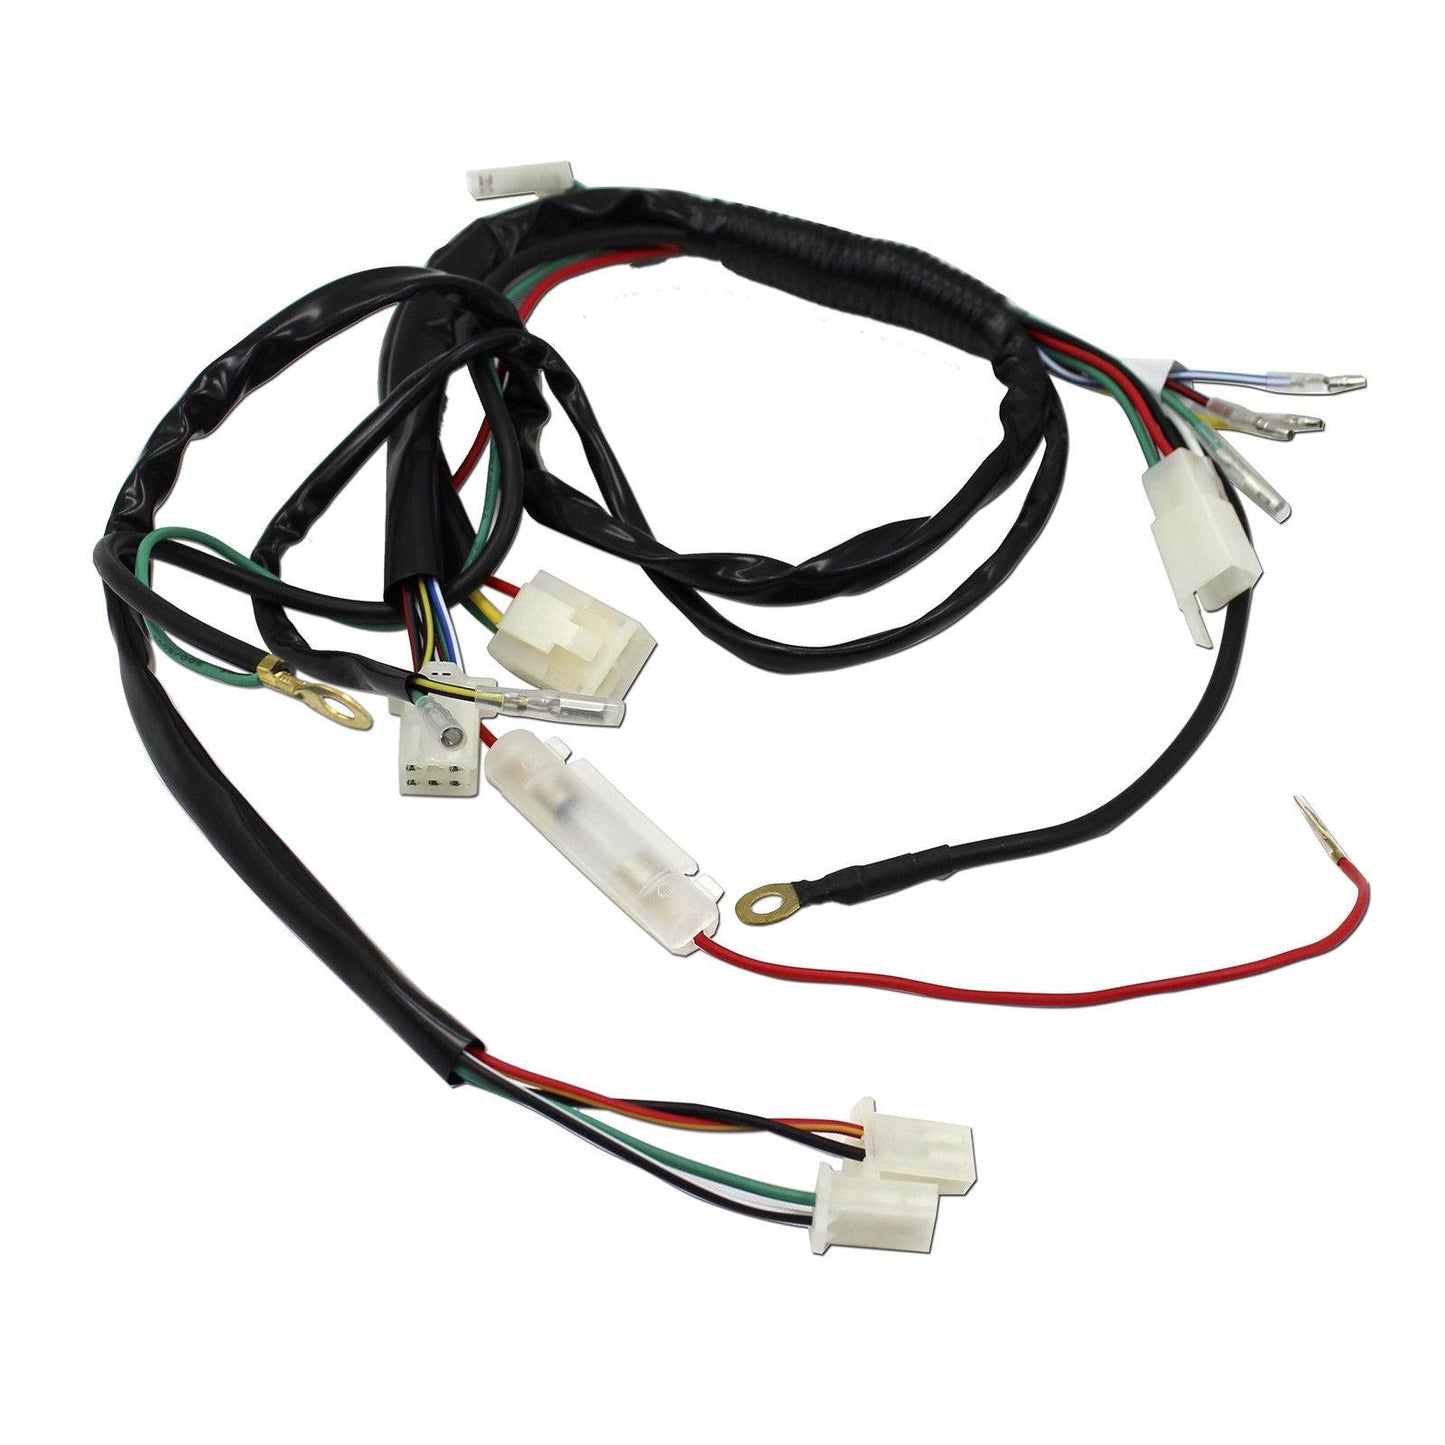 50/70/90/110/125cc 4 Stroke Engine Complete Wiring Loom Harness Thumpster Atomik - TDRMOTO